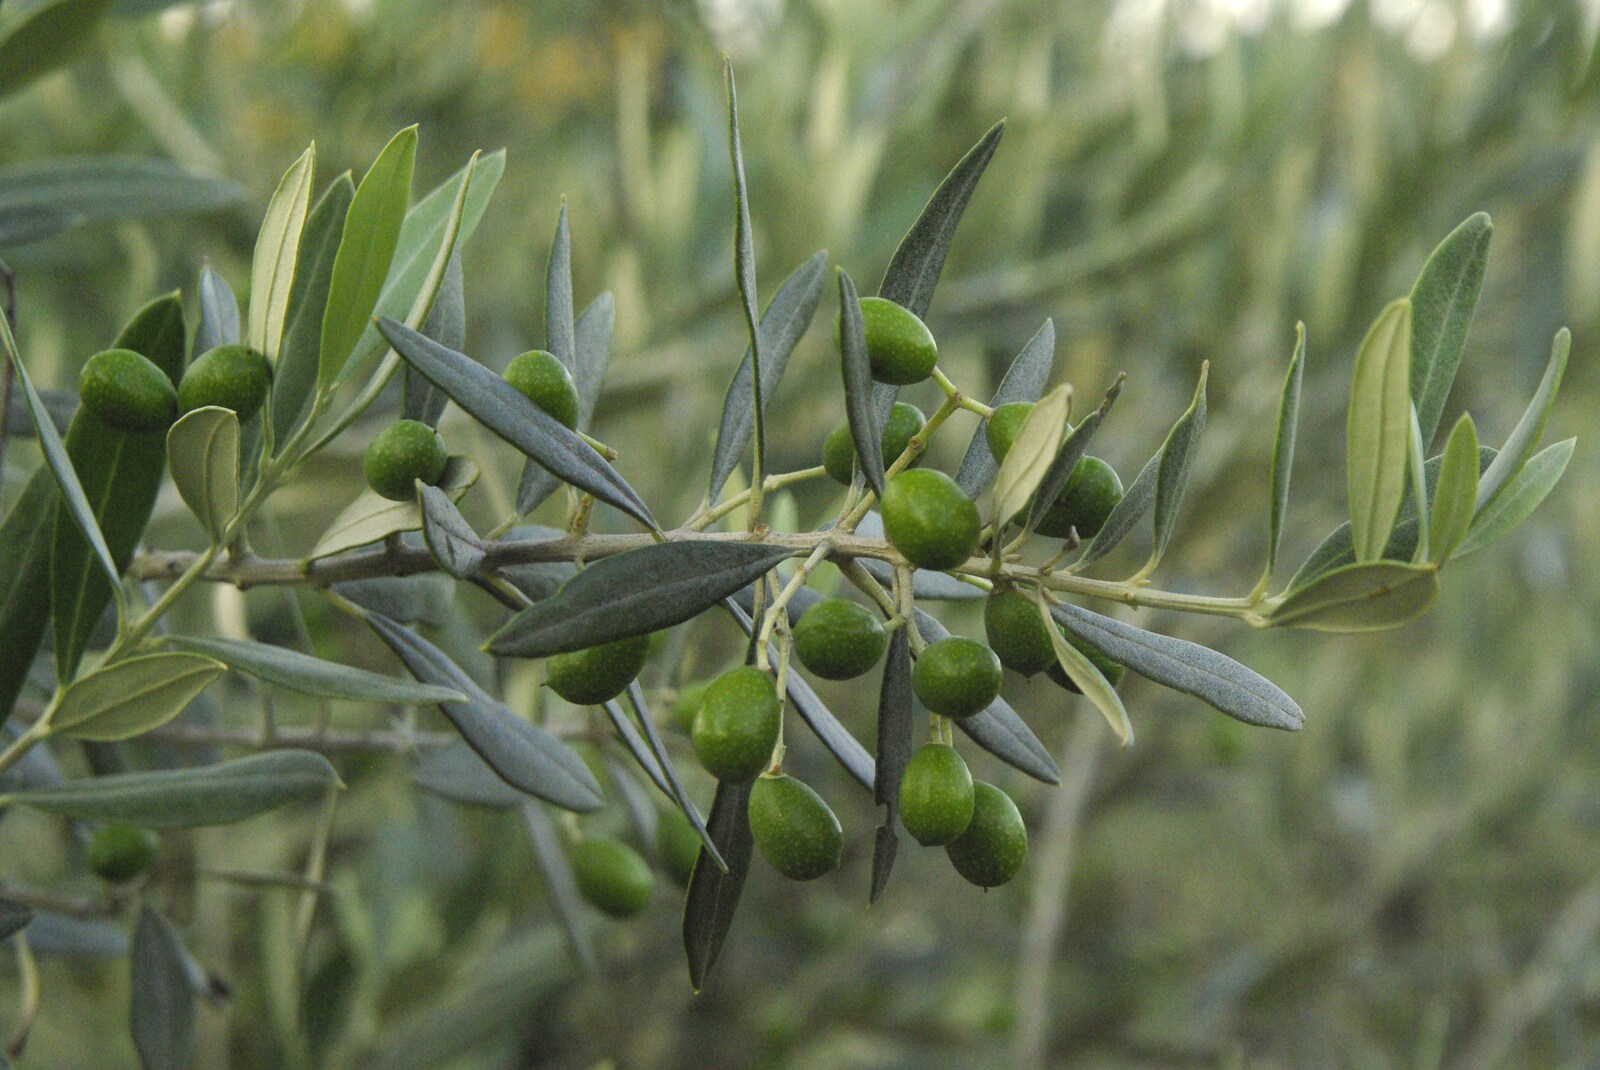 Tenuta Il Palazzo in Arezzo, Tuscany, Italy - 22nd July 2008: Some actual olives on a tree